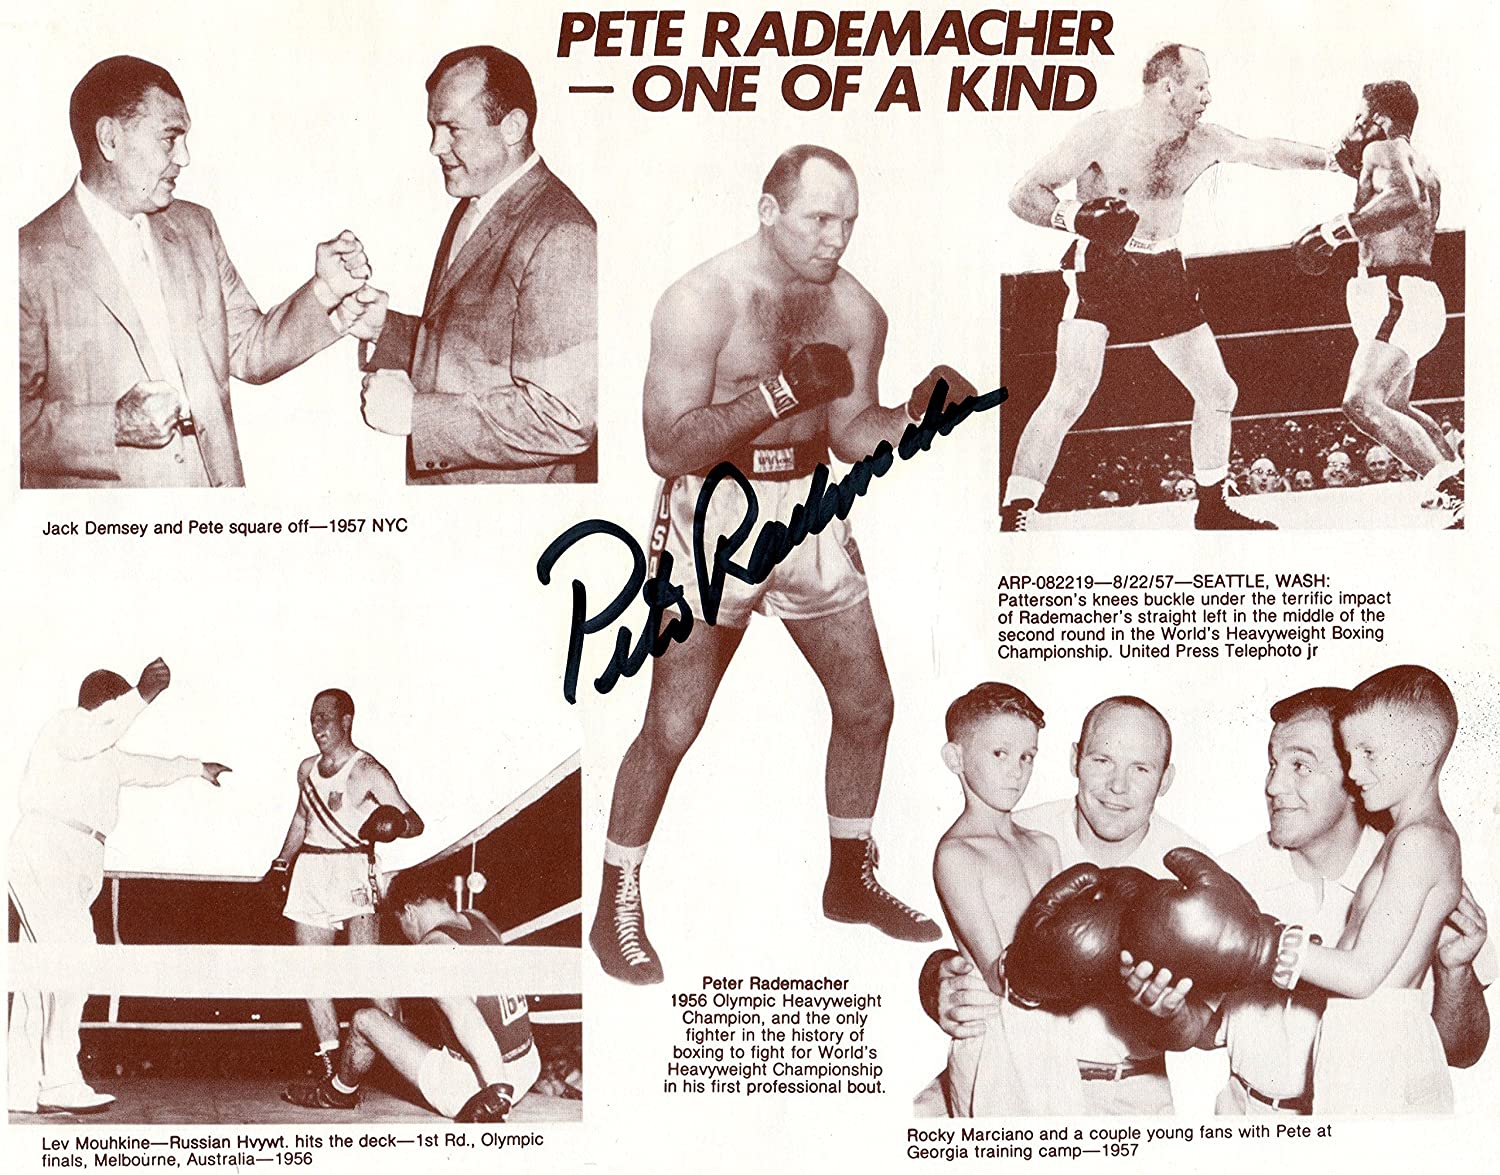 multiple images of Pete Rademacher during his professional boxing career